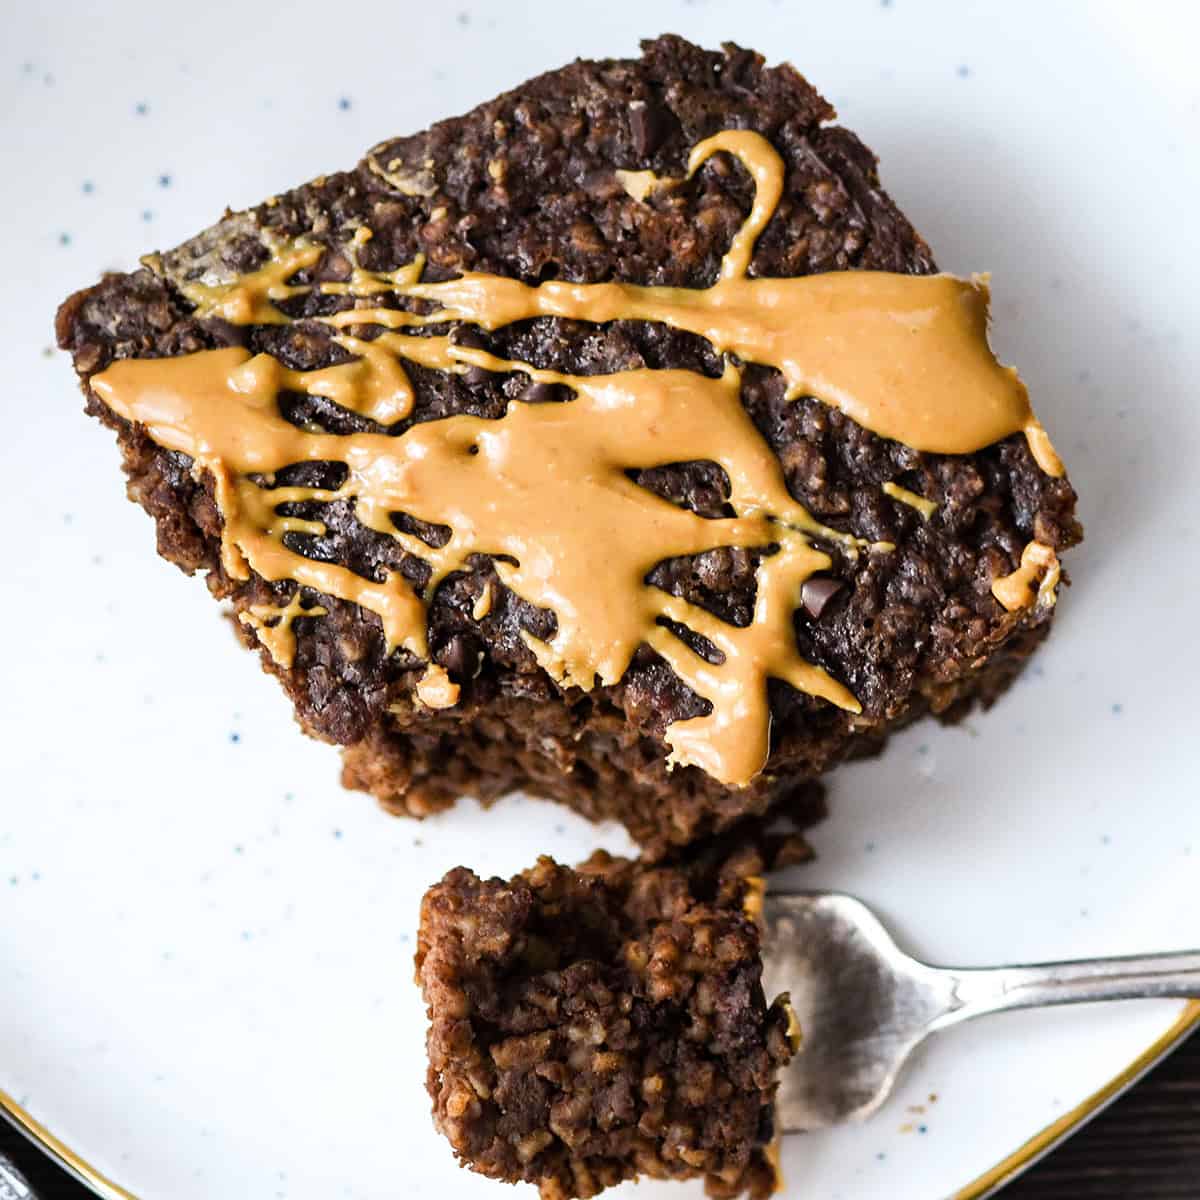 a piece of Baked Chocolate Peanut Butter Oatmeal on a plate with a fork taking a bite